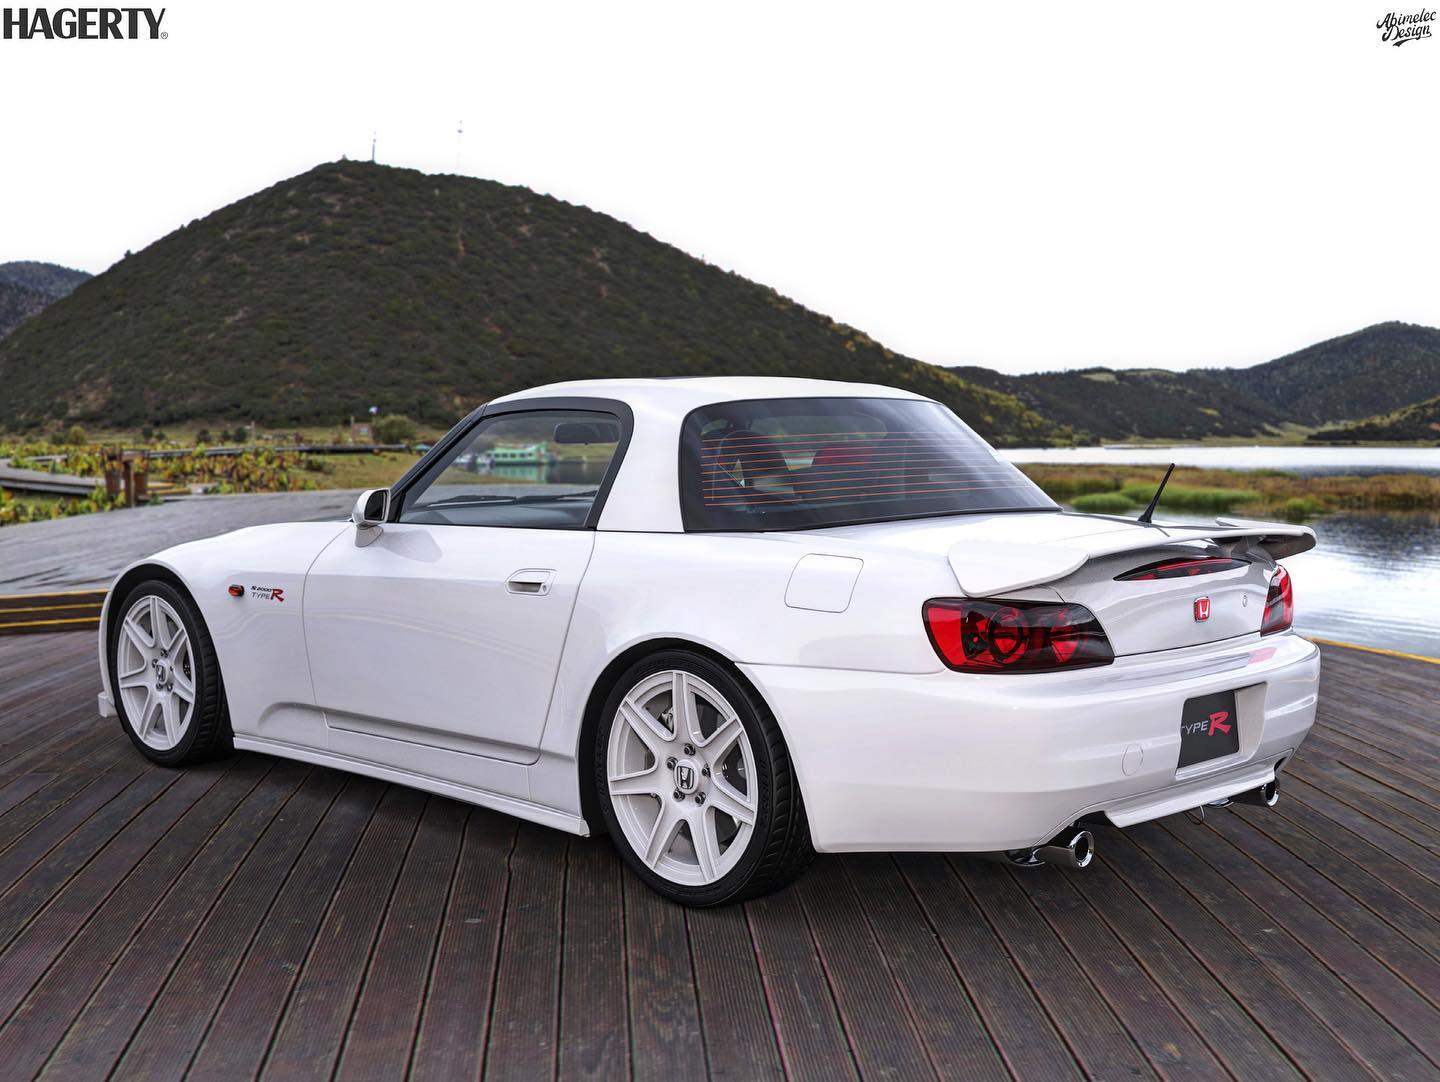 2010 Honda S2000 Type R Virtually Completes A Type V And S Club Racer